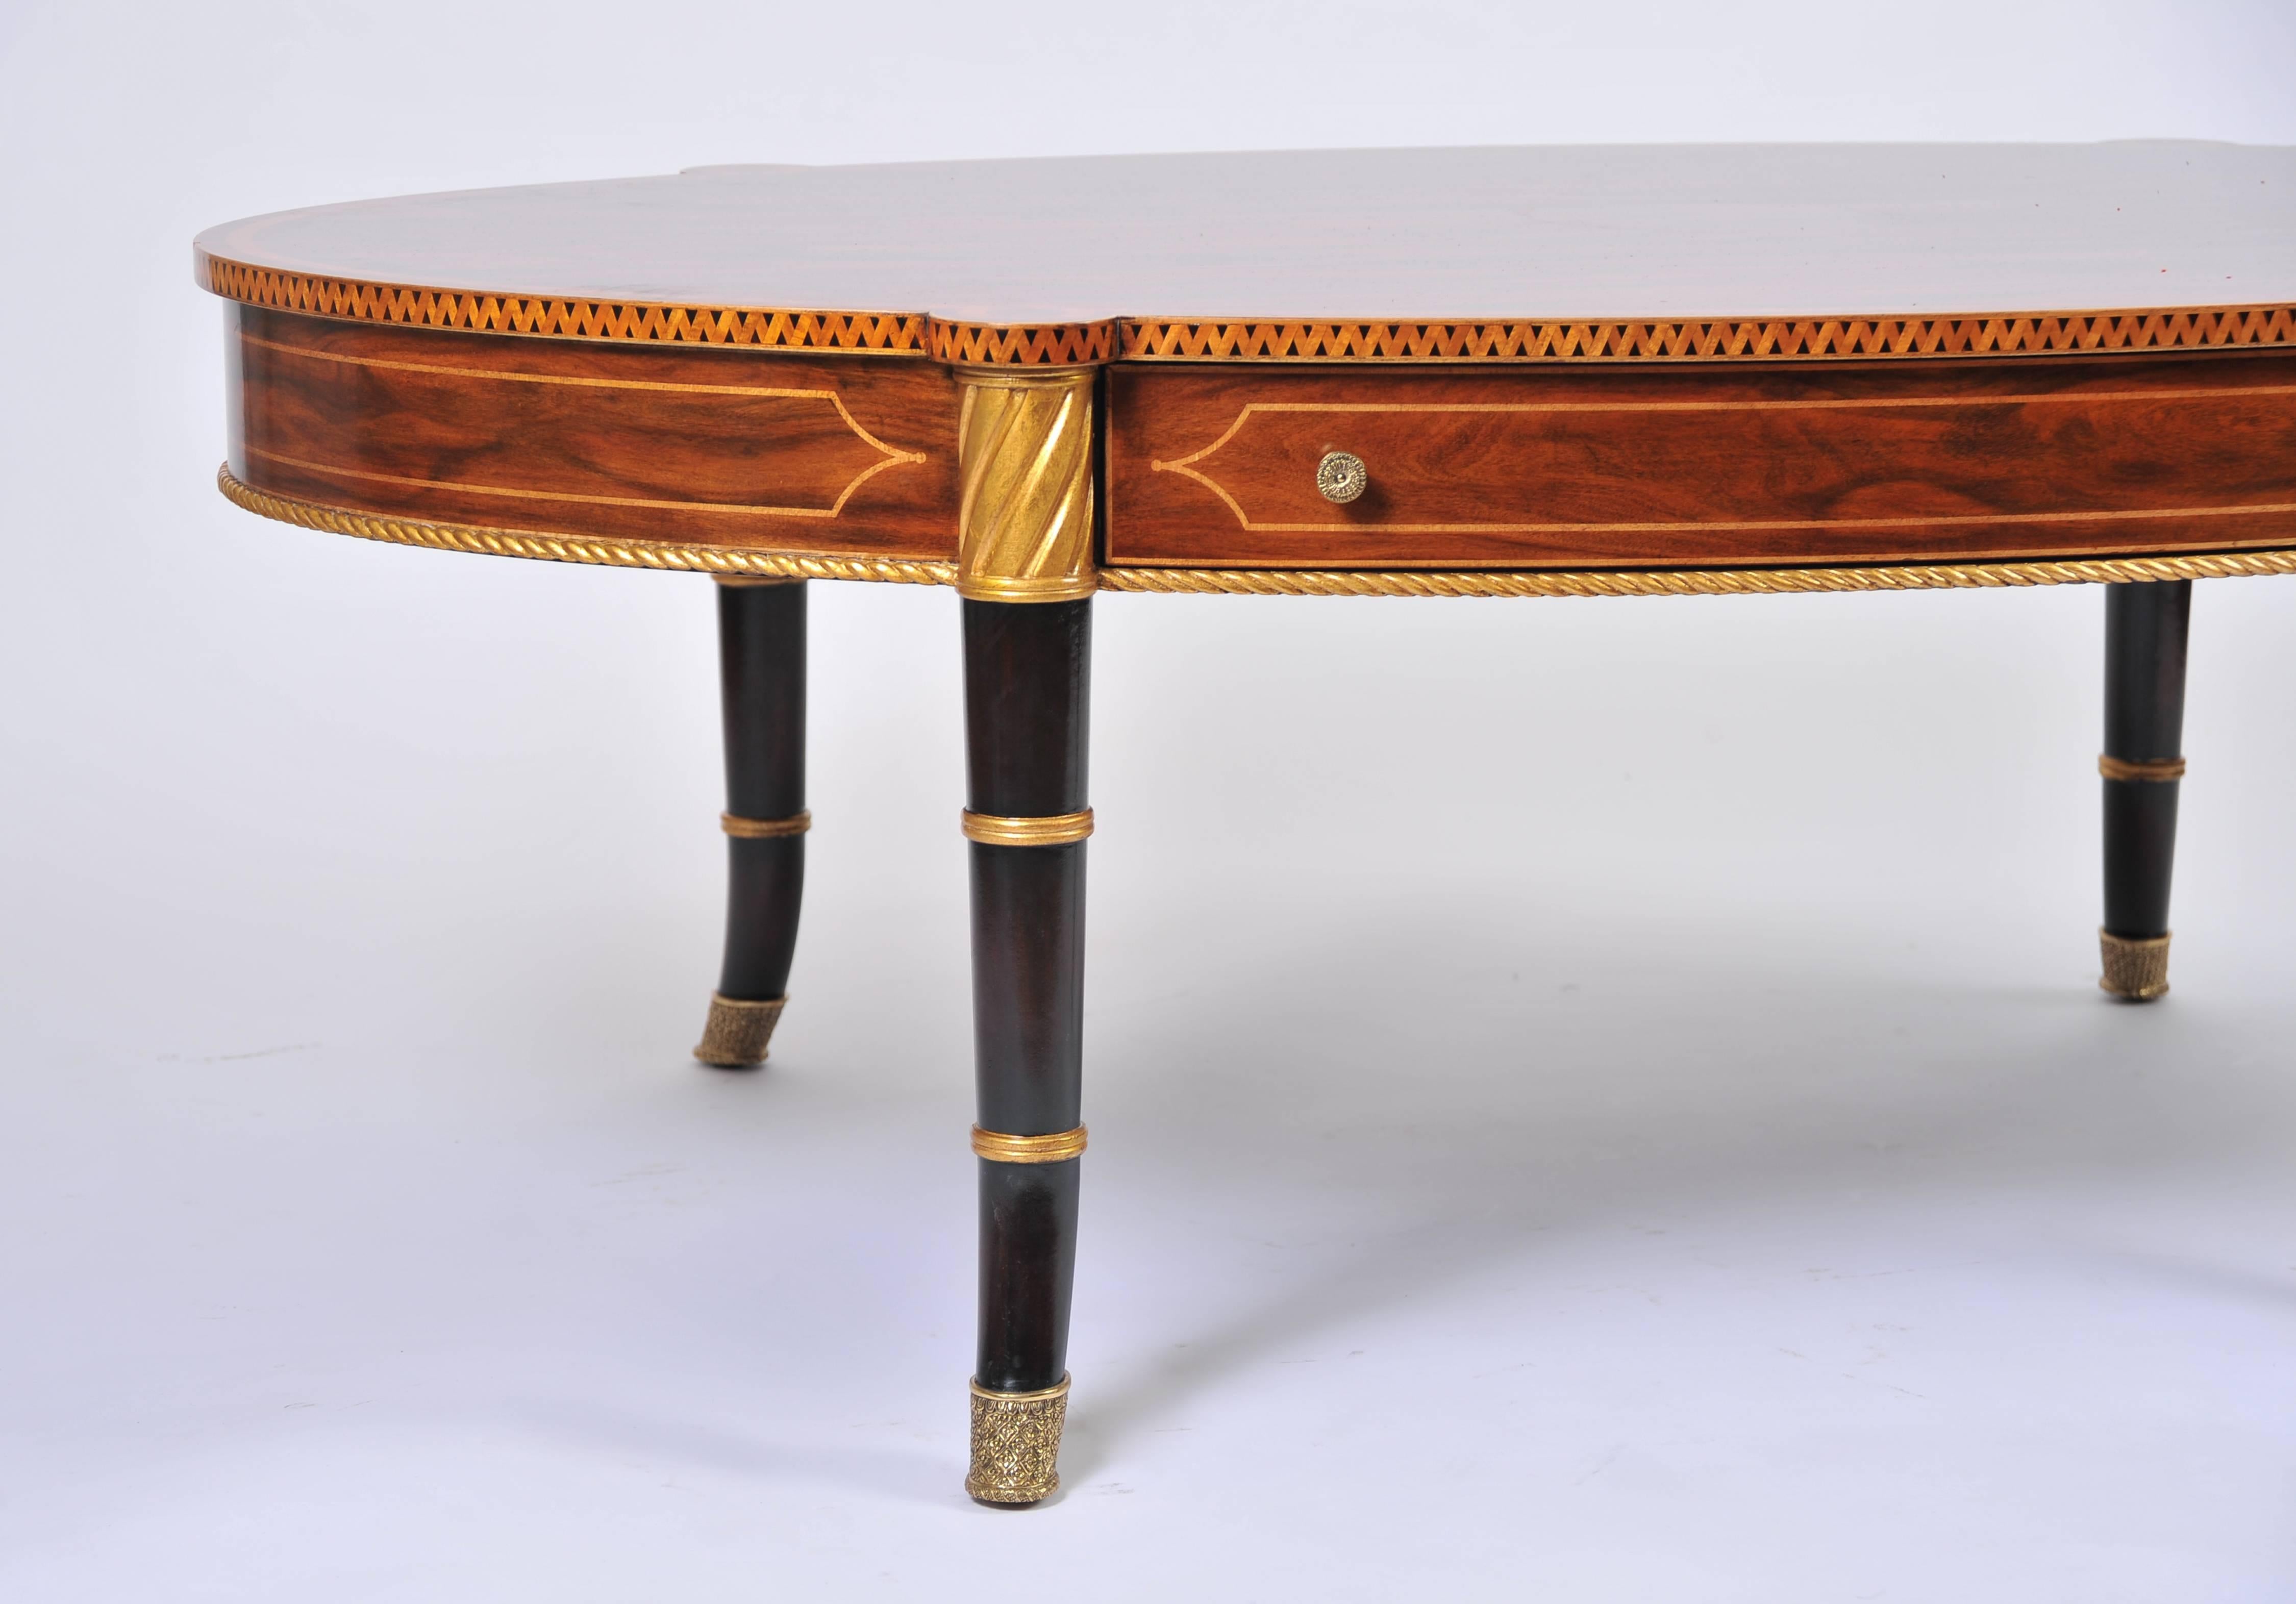 This beautiful and highly decorative oval rosewood coffee table features a satinwood crossbanding with ebonized and gilded legs. It measures 57 ¾ in – 146.7 cm wide, 35 in – 89 cm deep and 19 ¾ in – 50.2 cm high. This fine quality coffee table would